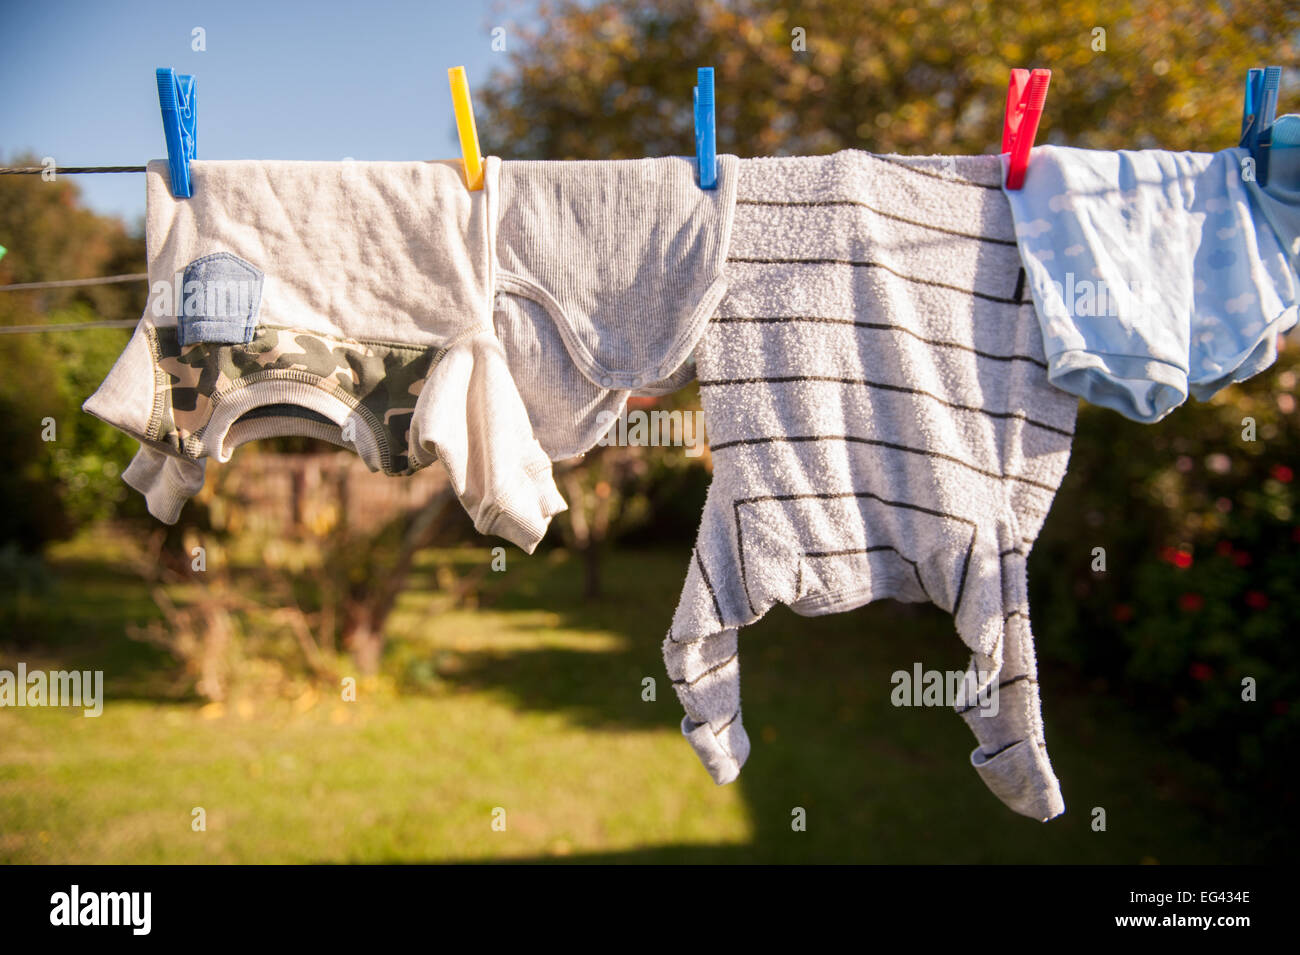 Childrens clothes hanging on a line to dry Stock Photo